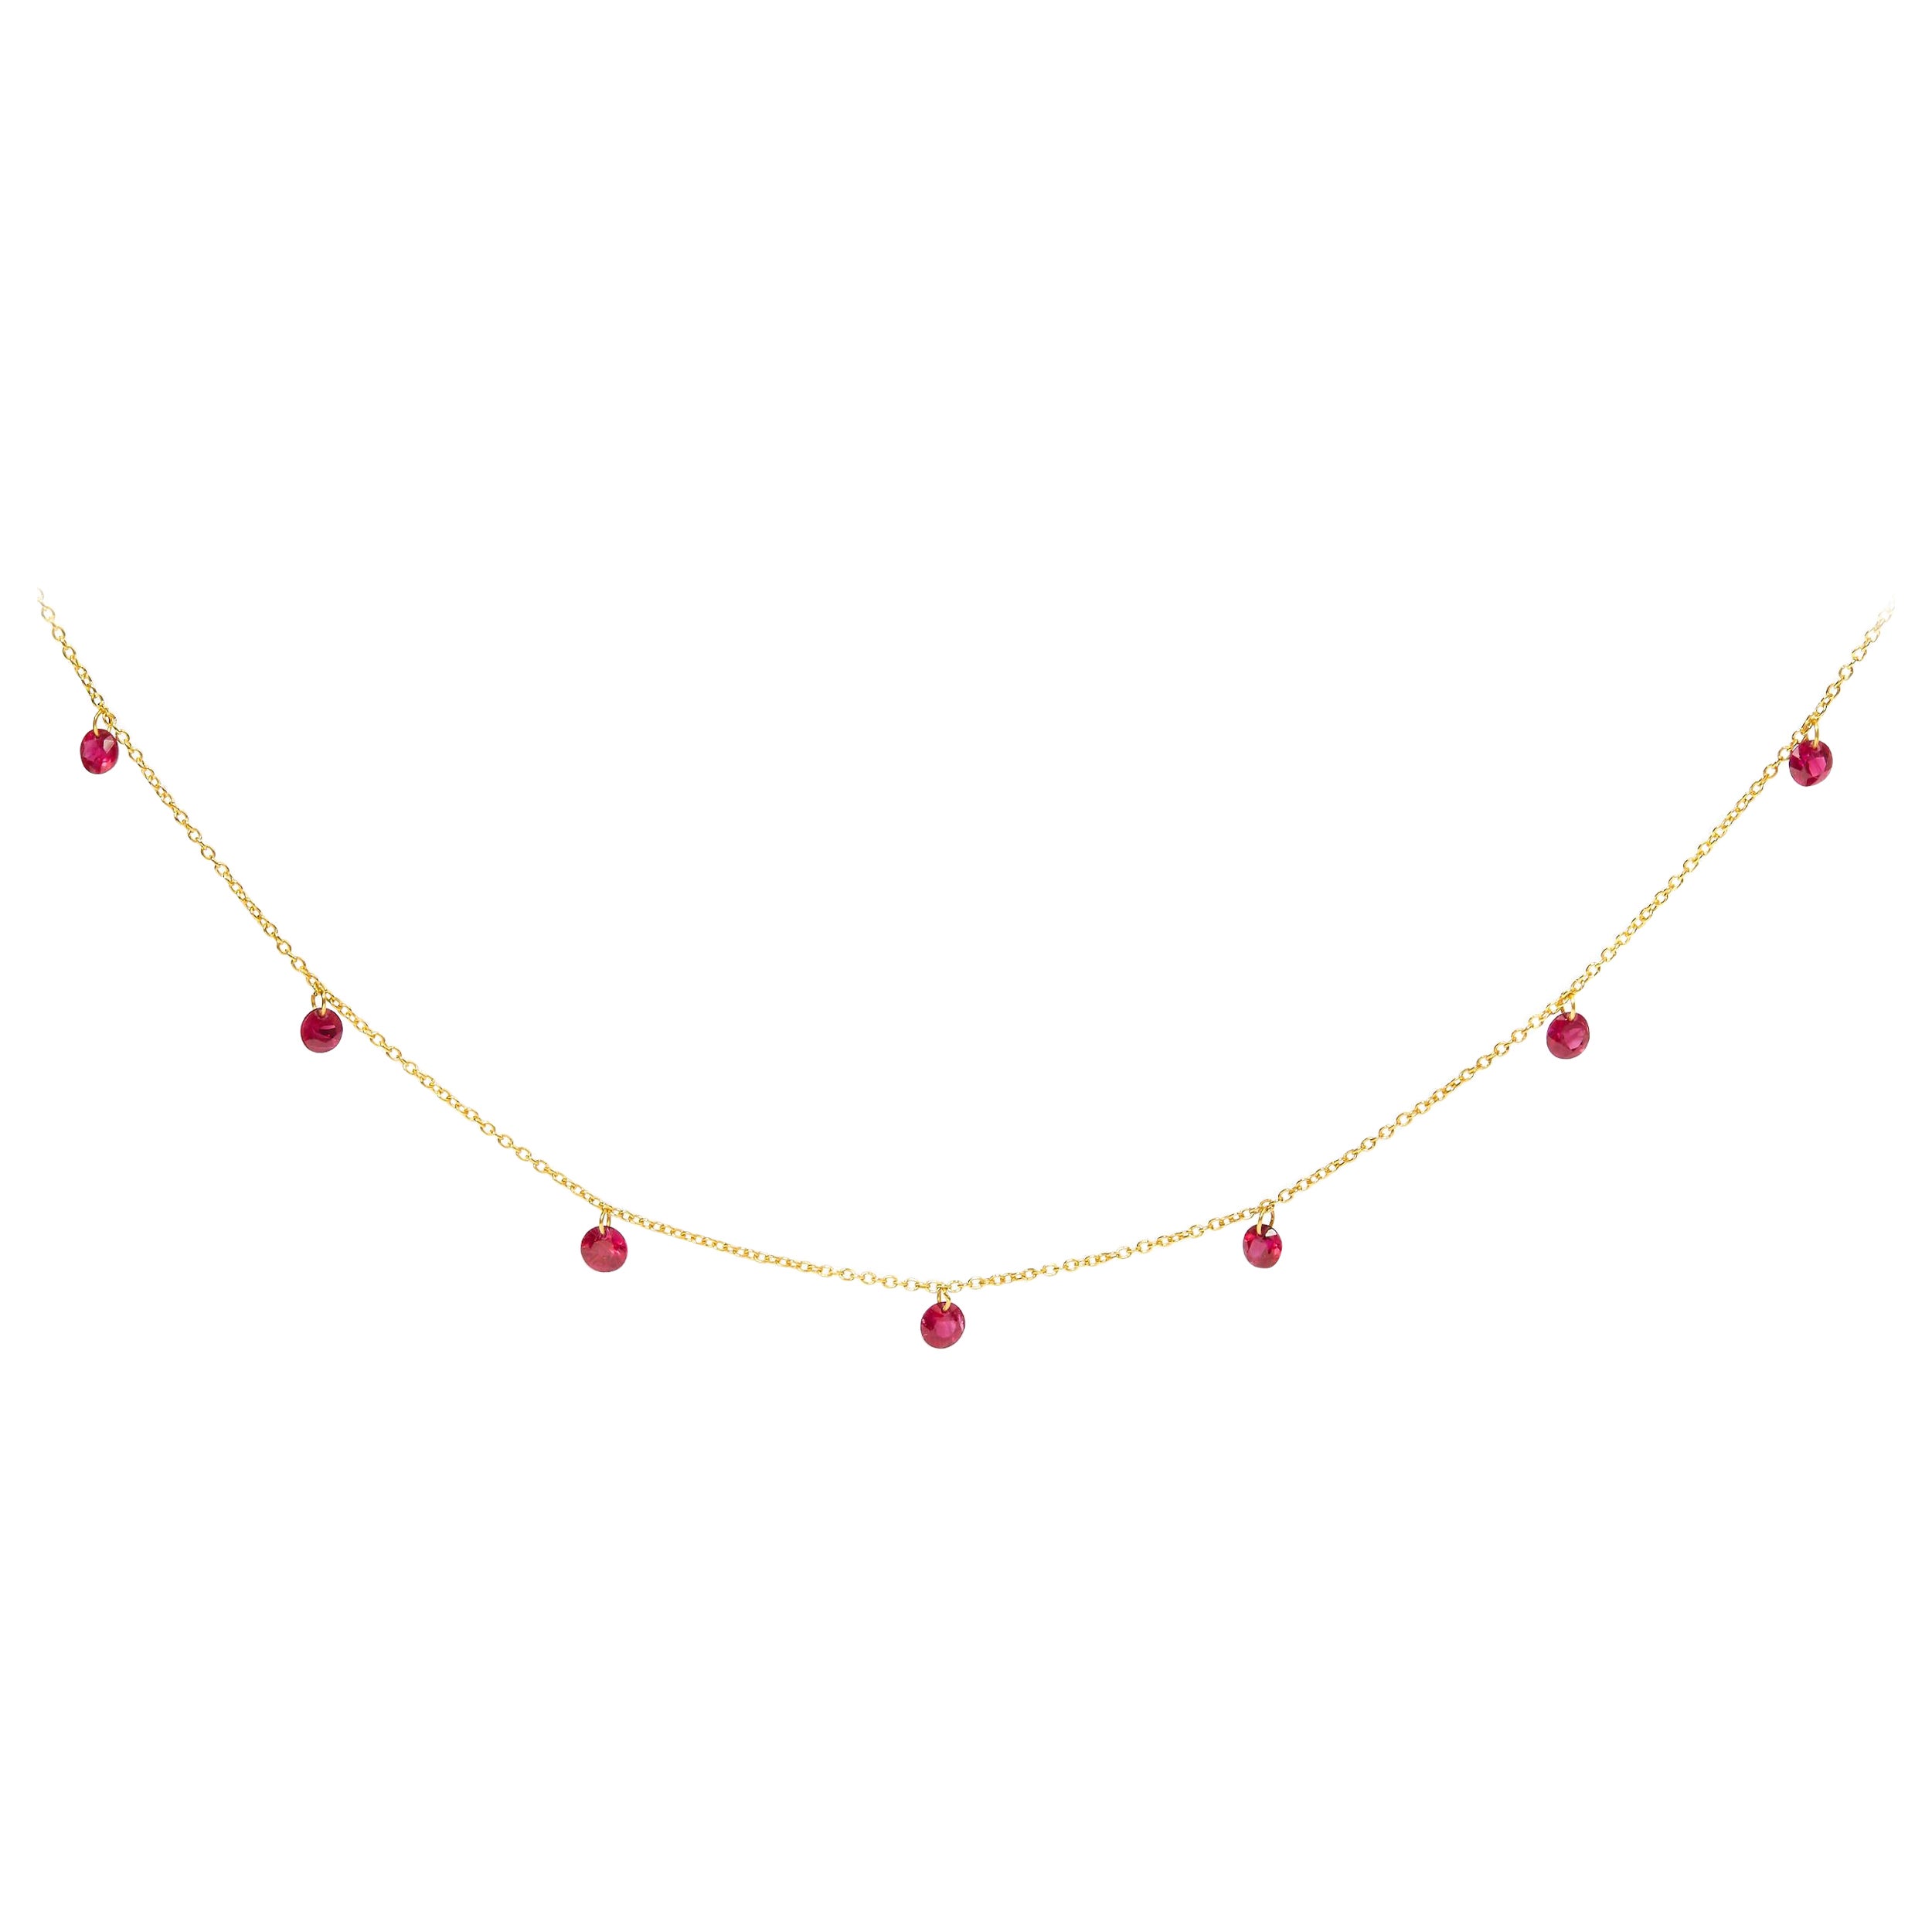 18K Yellow Gold Necklace 1 1/3 Carat Dangling Ruby Drop 18" Chain Collar